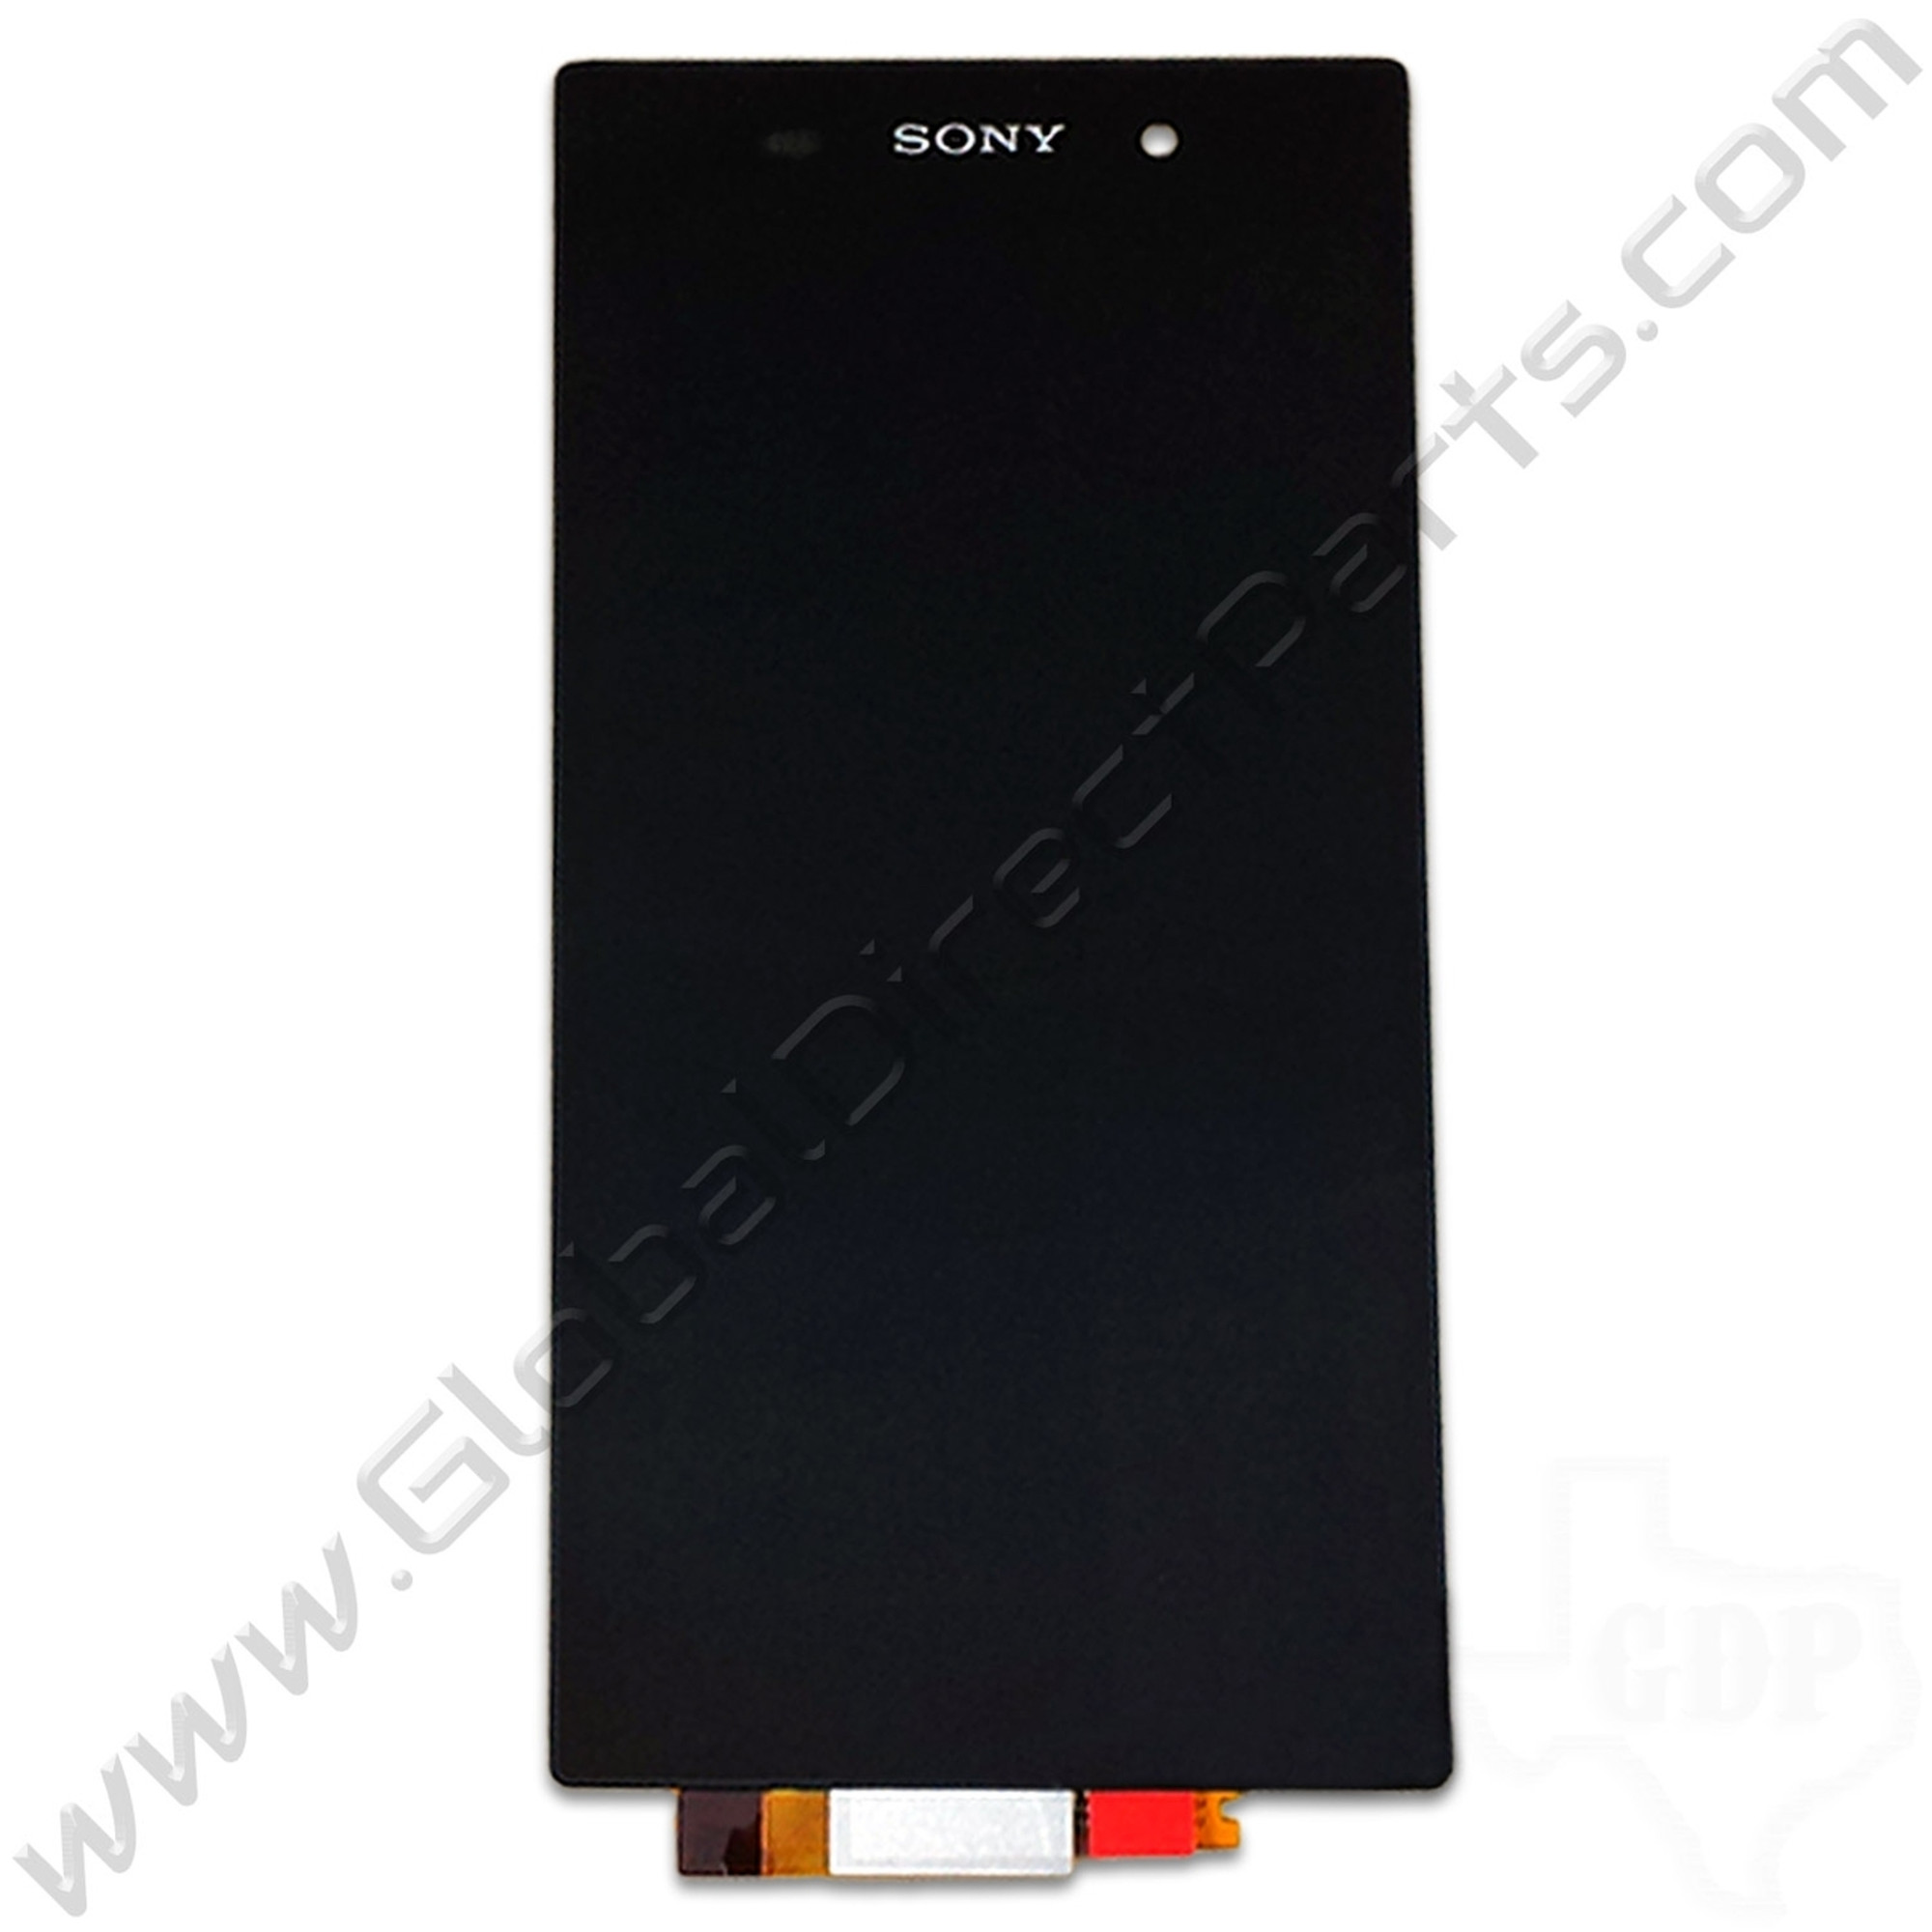 OEM Sony Xperia Z1 LCD & Digitizer Assembly - Global Direct Parts